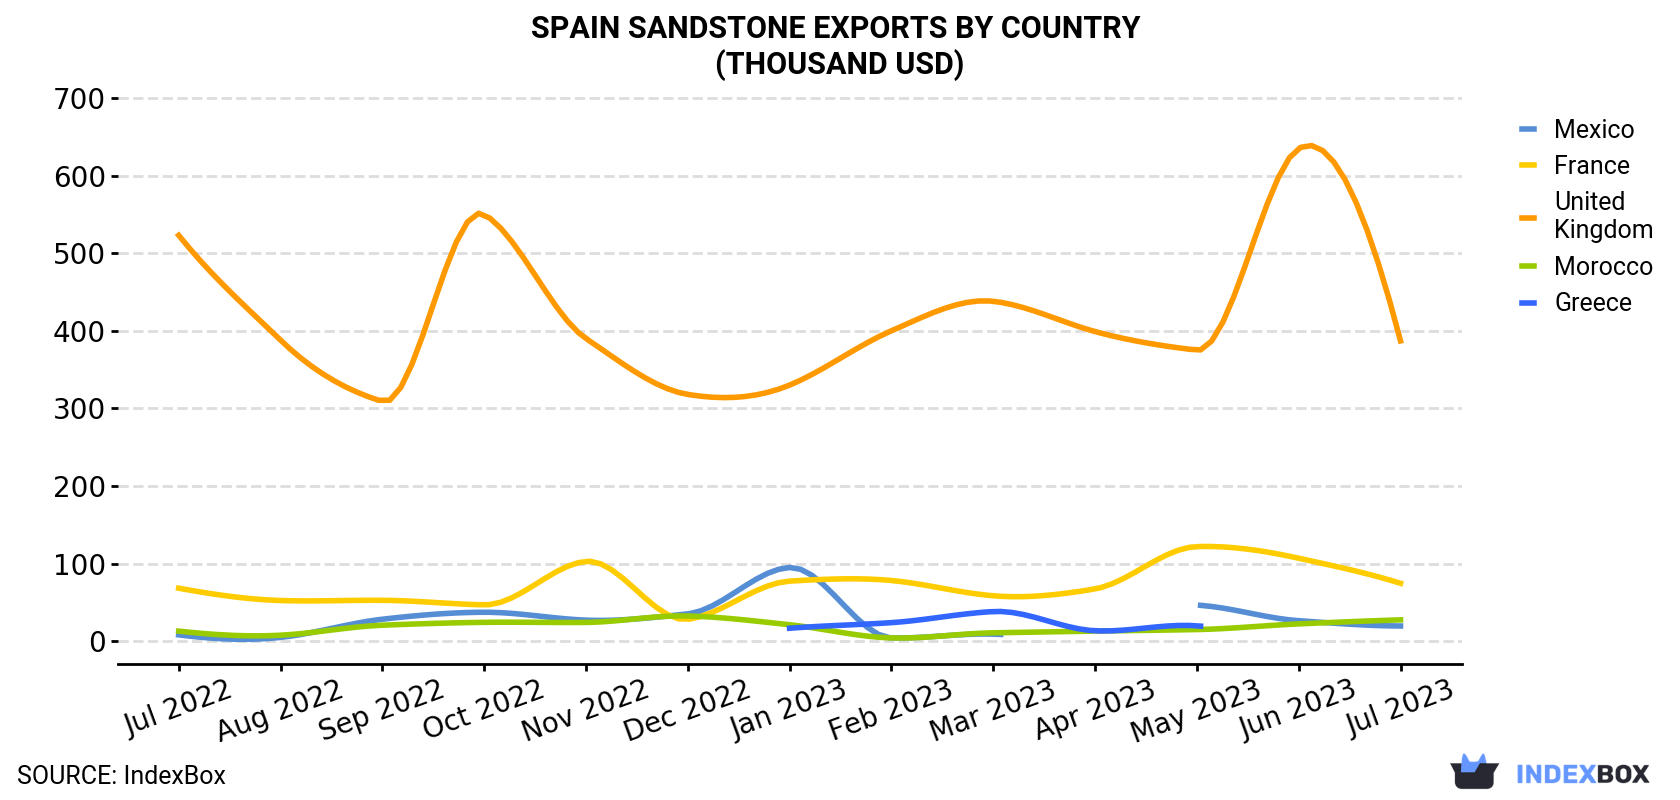 Spain Sandstone Exports By Country (Thousand USD)